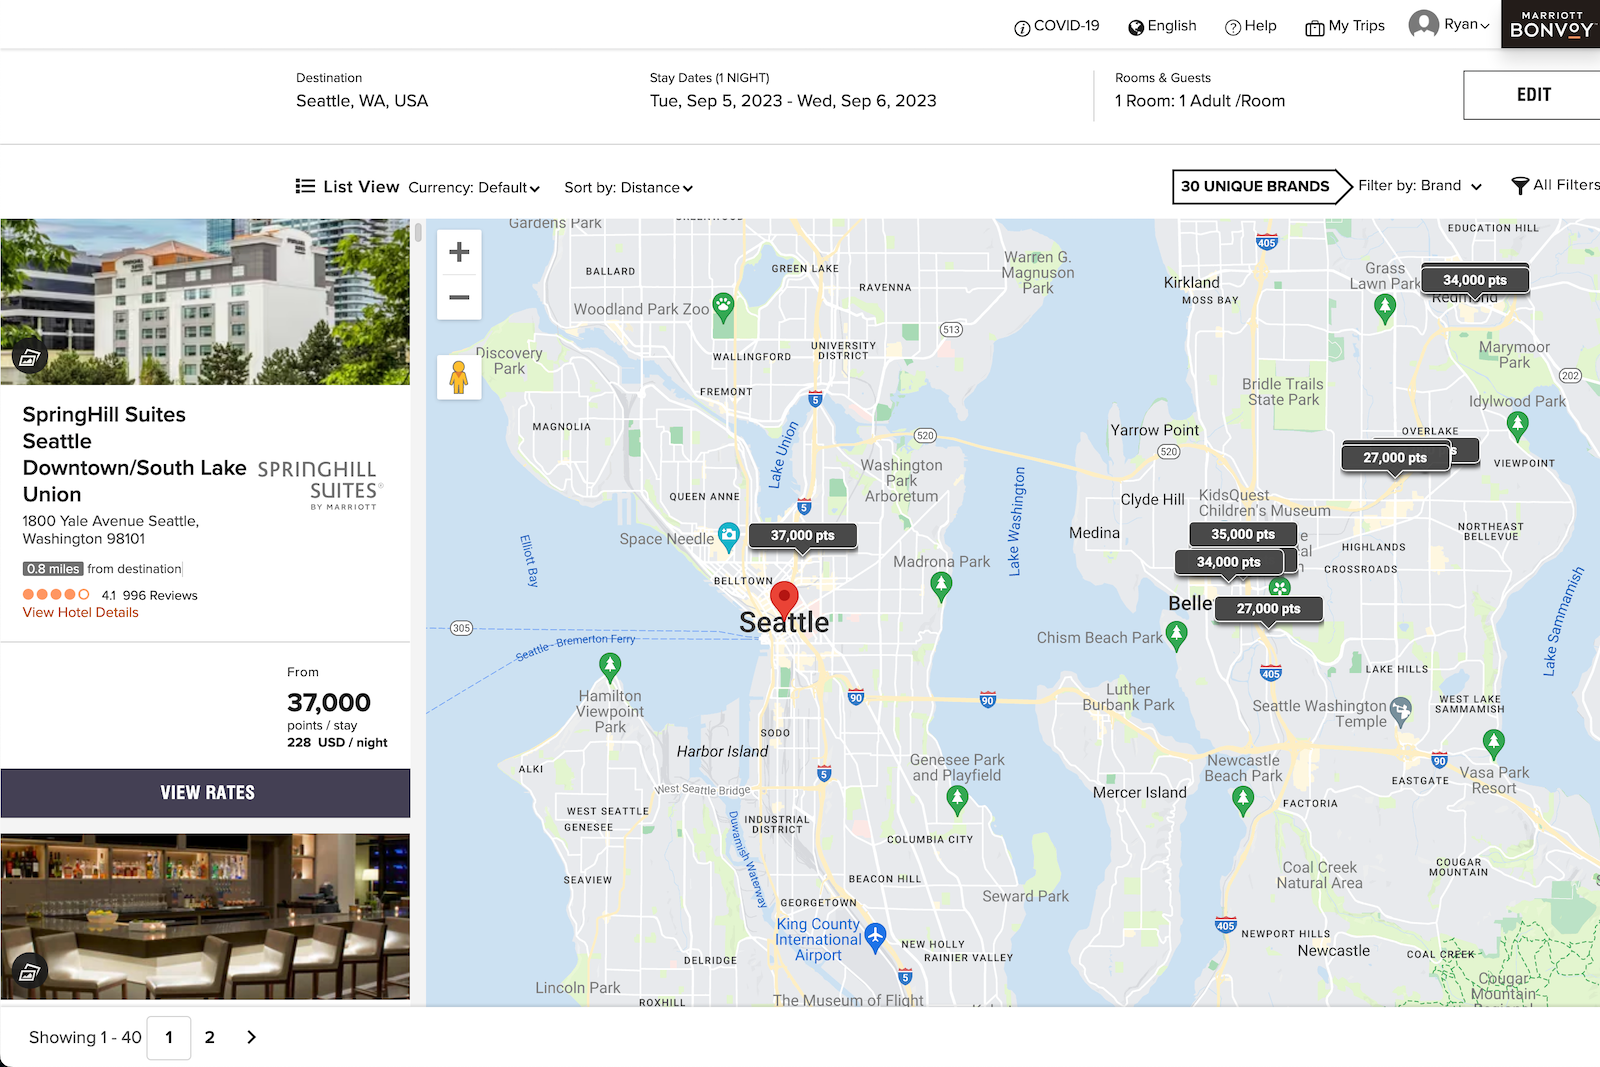 Marriott points search results after filters are applied